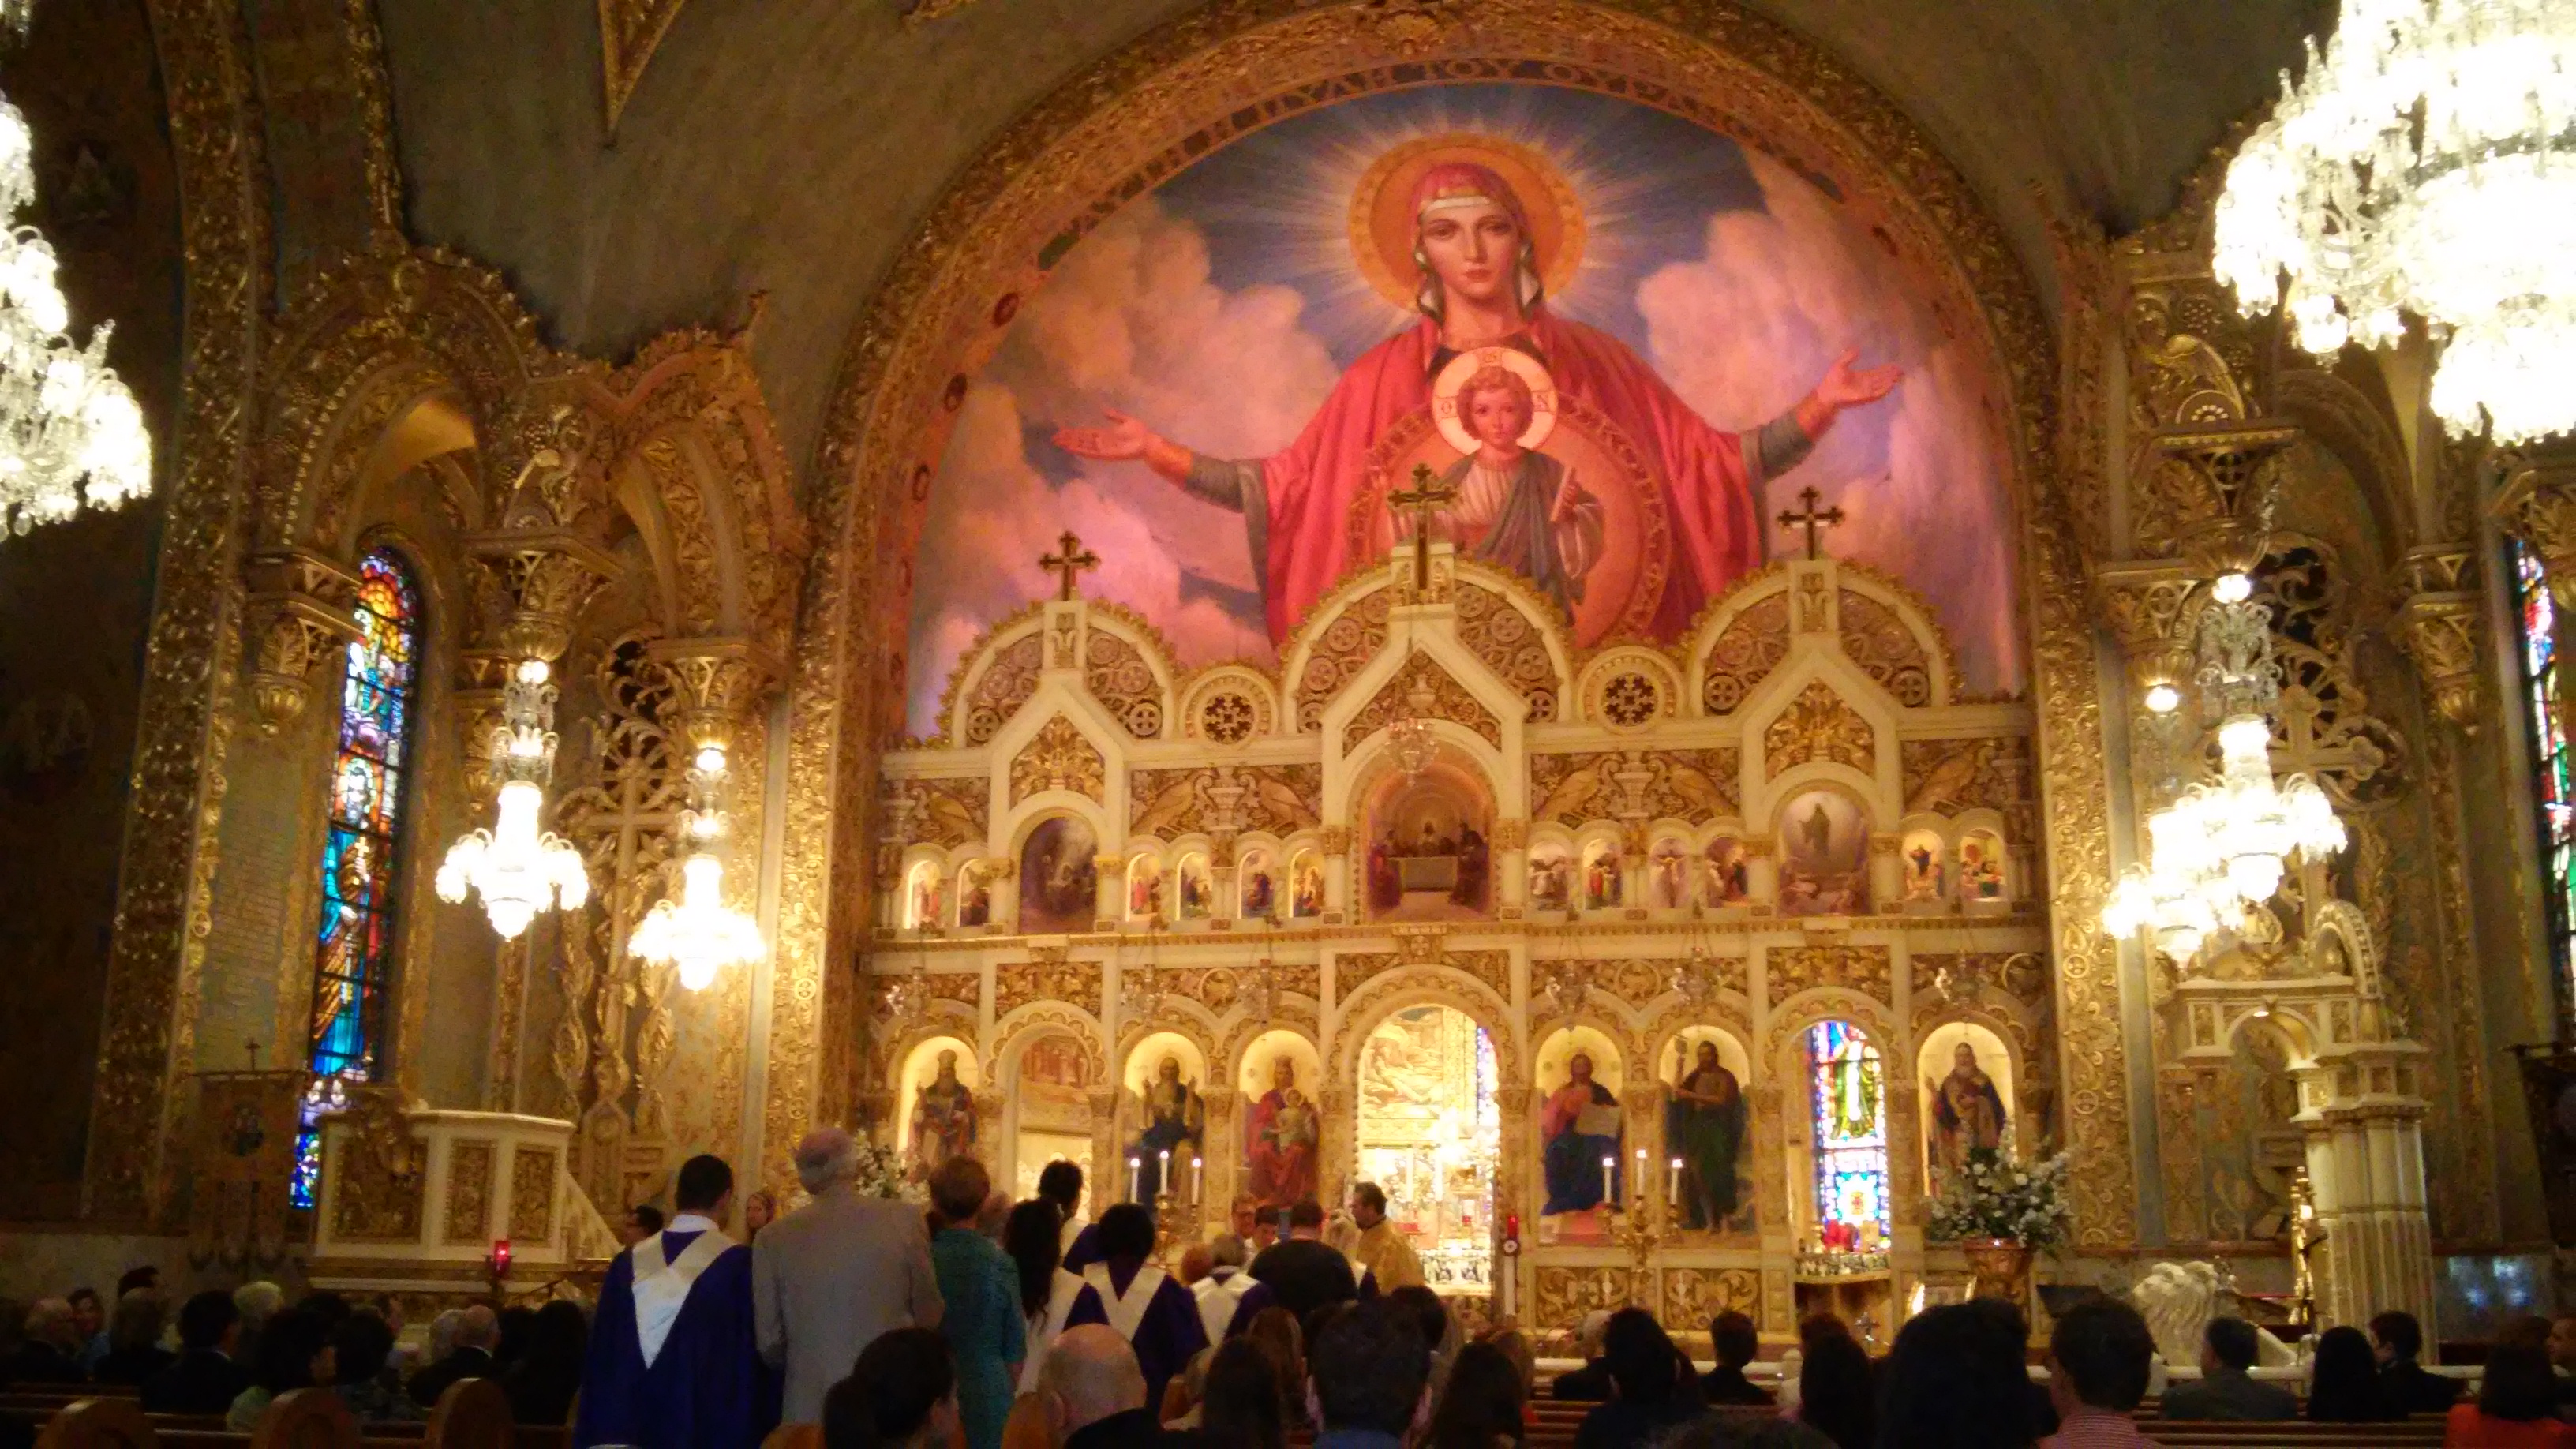 Saint Sophia Cathedral March 2015 Make a prayer, mixed with a wish to someone you love, not yourself...